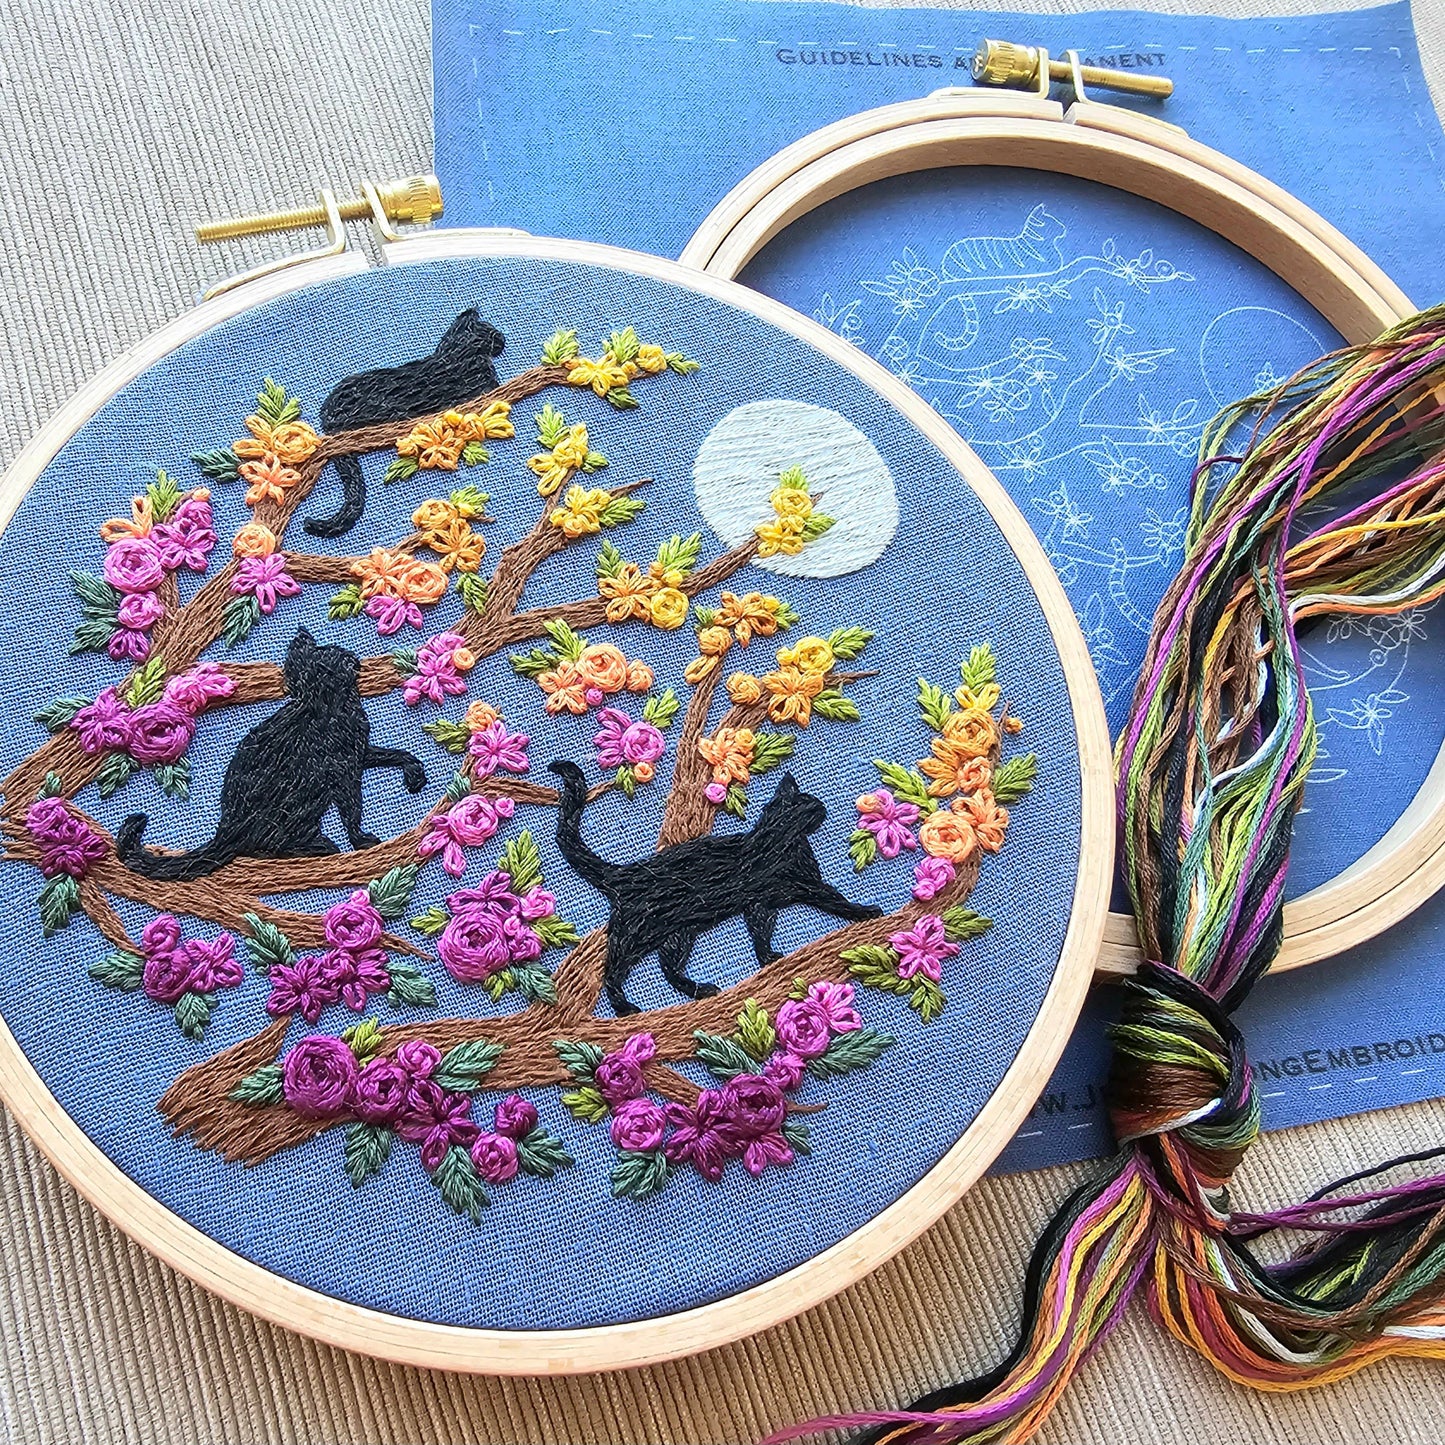 Cats & Full Moon Embroidery Kit: Black Cats